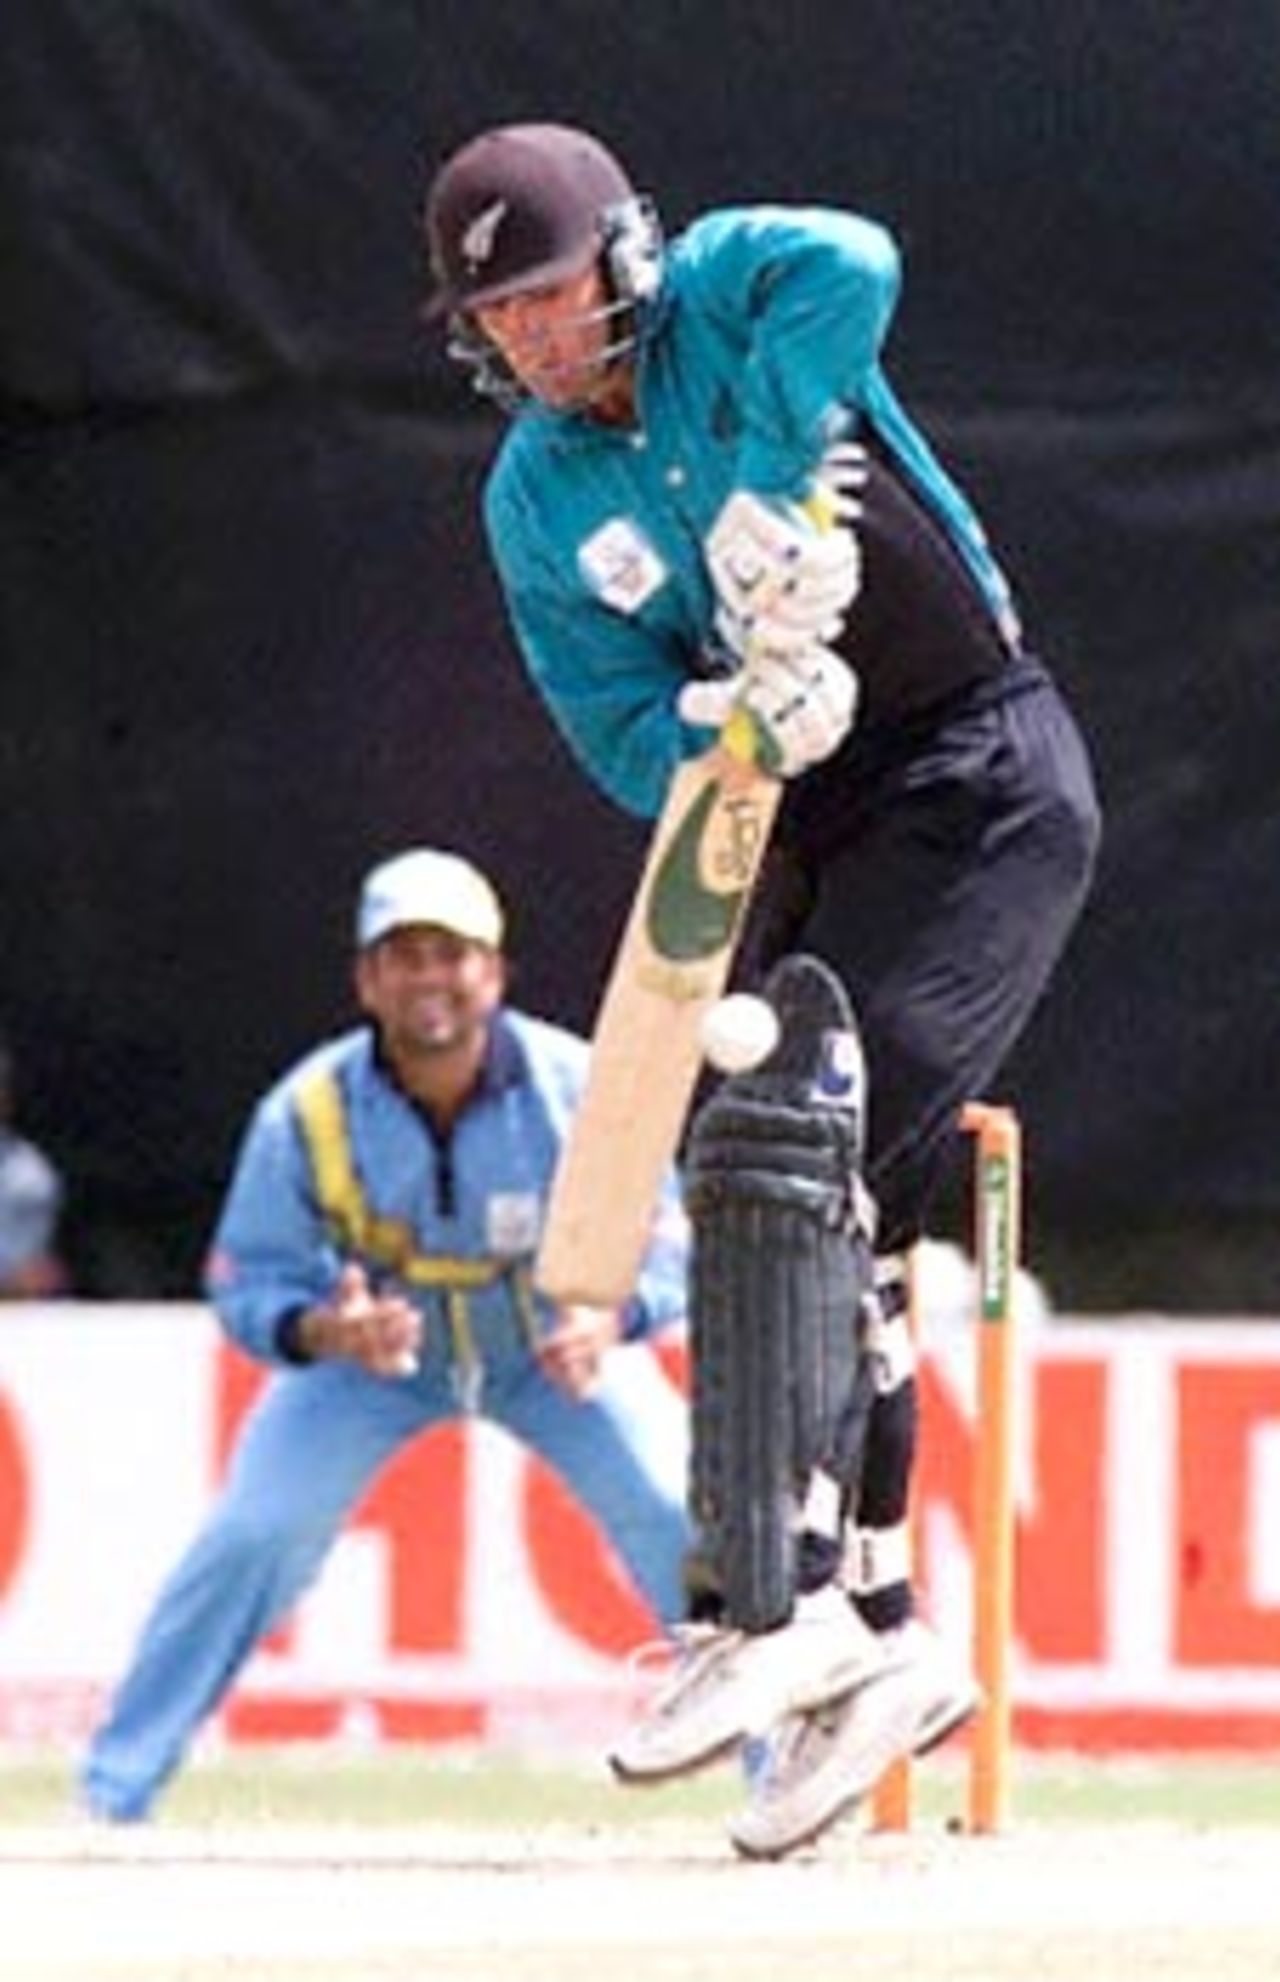 Astle tries to flick the ball as Tendulkar watches from the slips. ICC KnockOut 2000/01, Final, India v New Zealand, Gymkhana Club Ground, Nairobi 15 October 2000